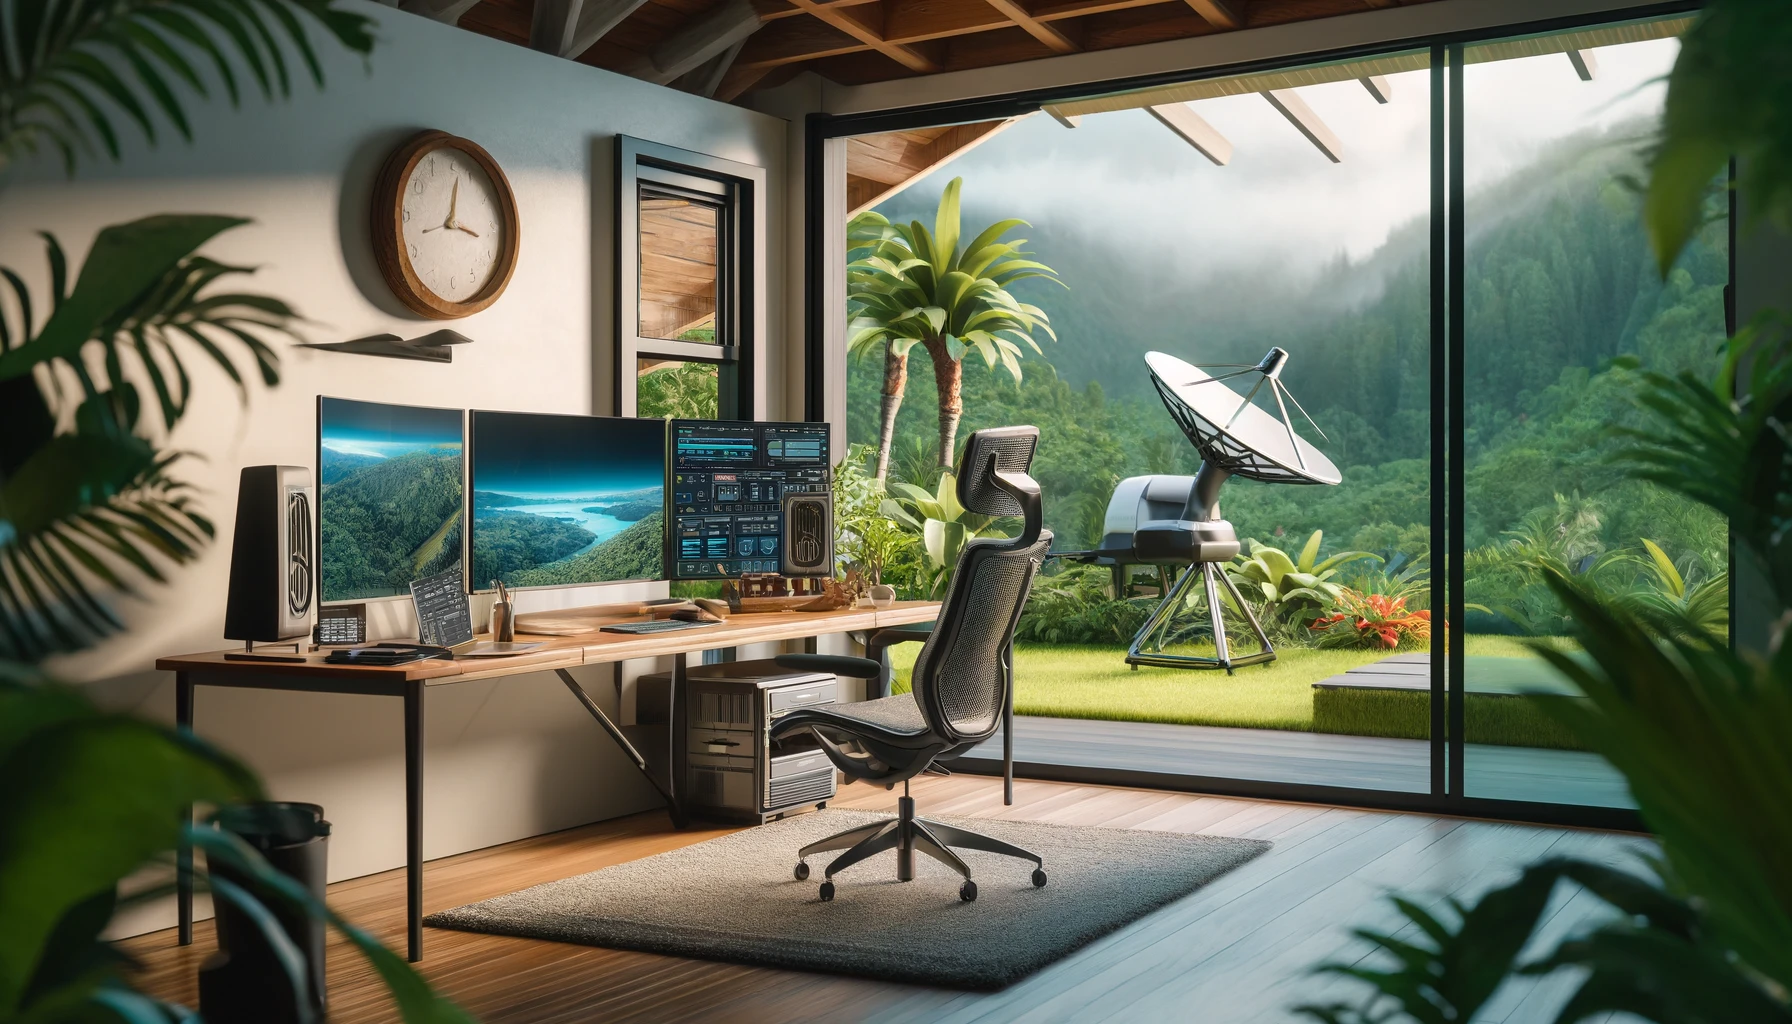 Modern home office in Hilo, Hawaii, showcasing satellite internet technology from Viasat. The office features a sleek, contemporary design with a large window offering views of lush Hawaiian landscapes. A satellite dish is visible outside, emphasizing connectivity. The interior includes a high-end computer, stylish ergonomic chair, and elements of local Hawaiian decor, highlighting both functionality and regional aesthetic.